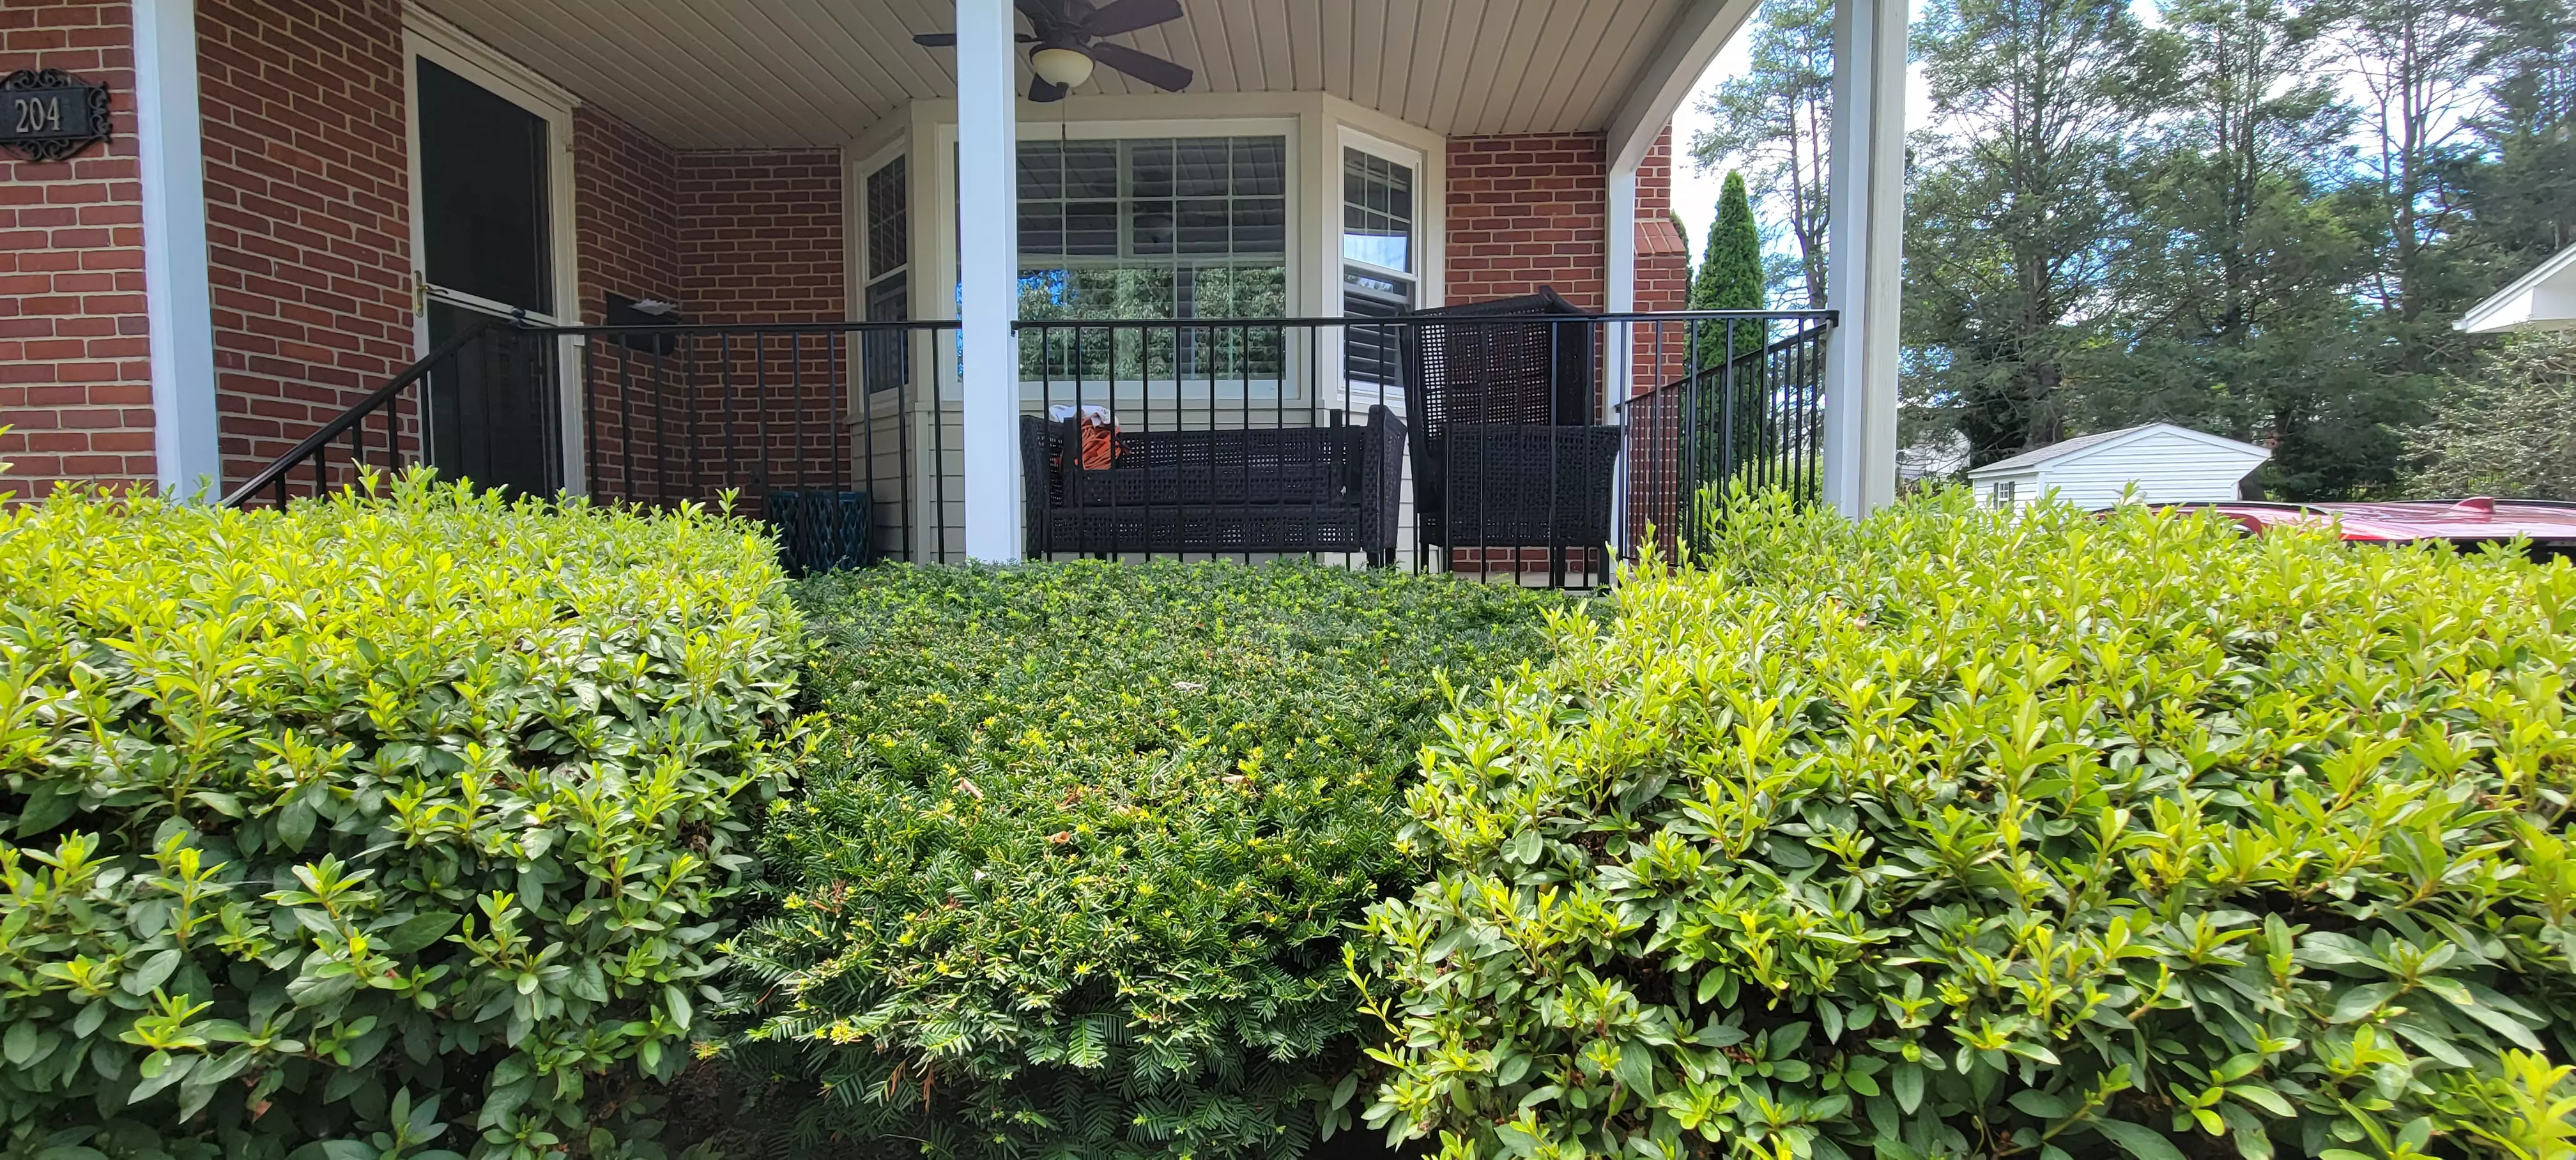 Photo of black residential railing on an outdoor patio surrounded by bushes